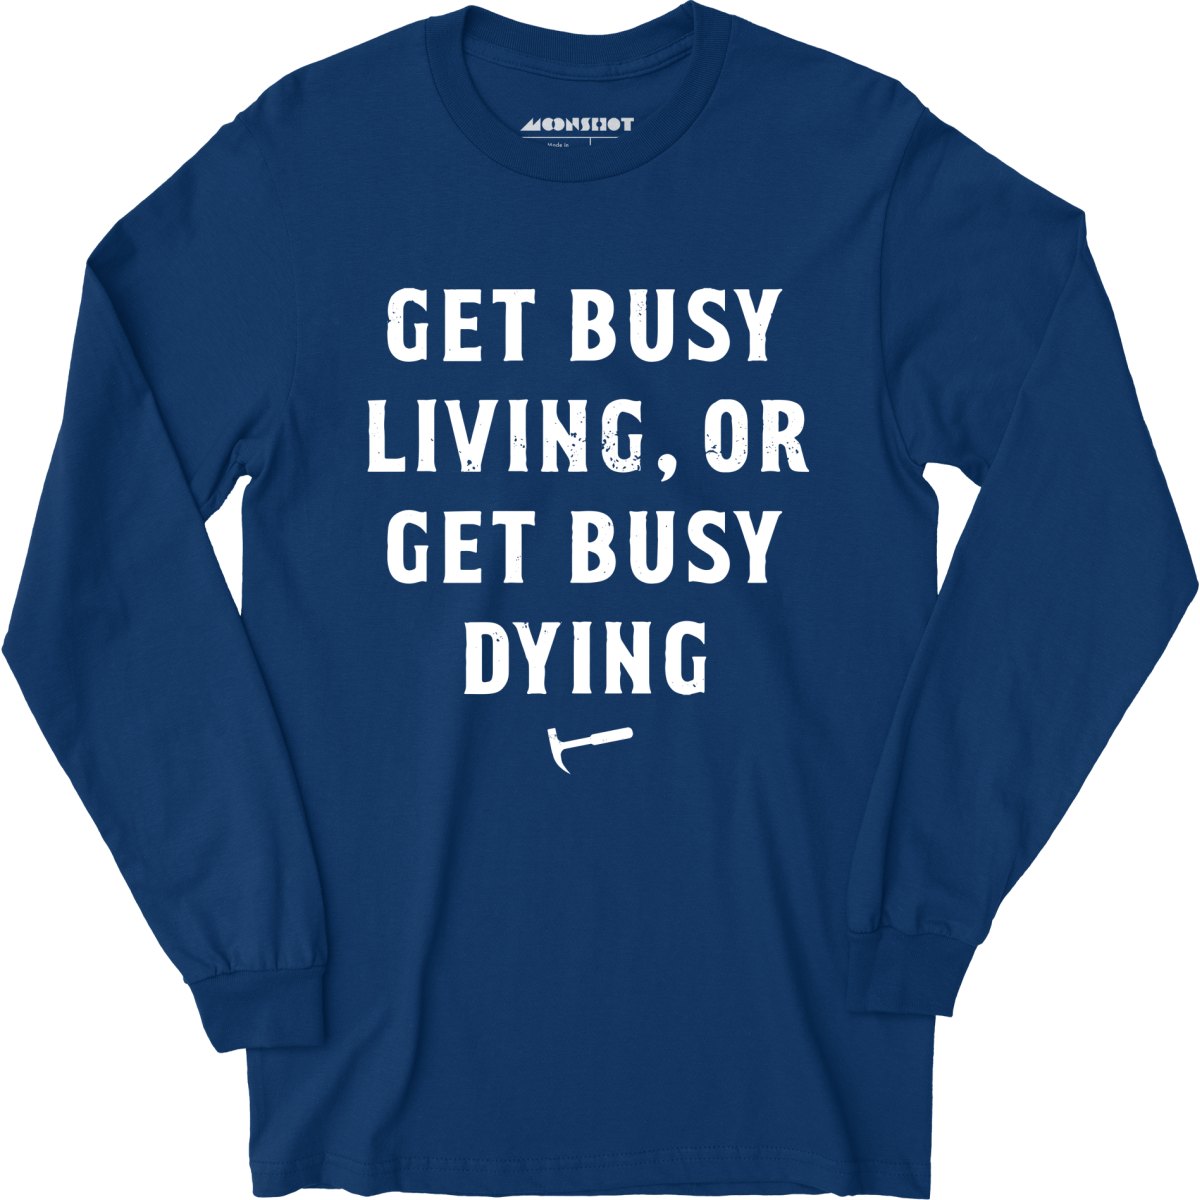 Get Busy Living or Get Busy Dying - Long Sleeve T-Shirt